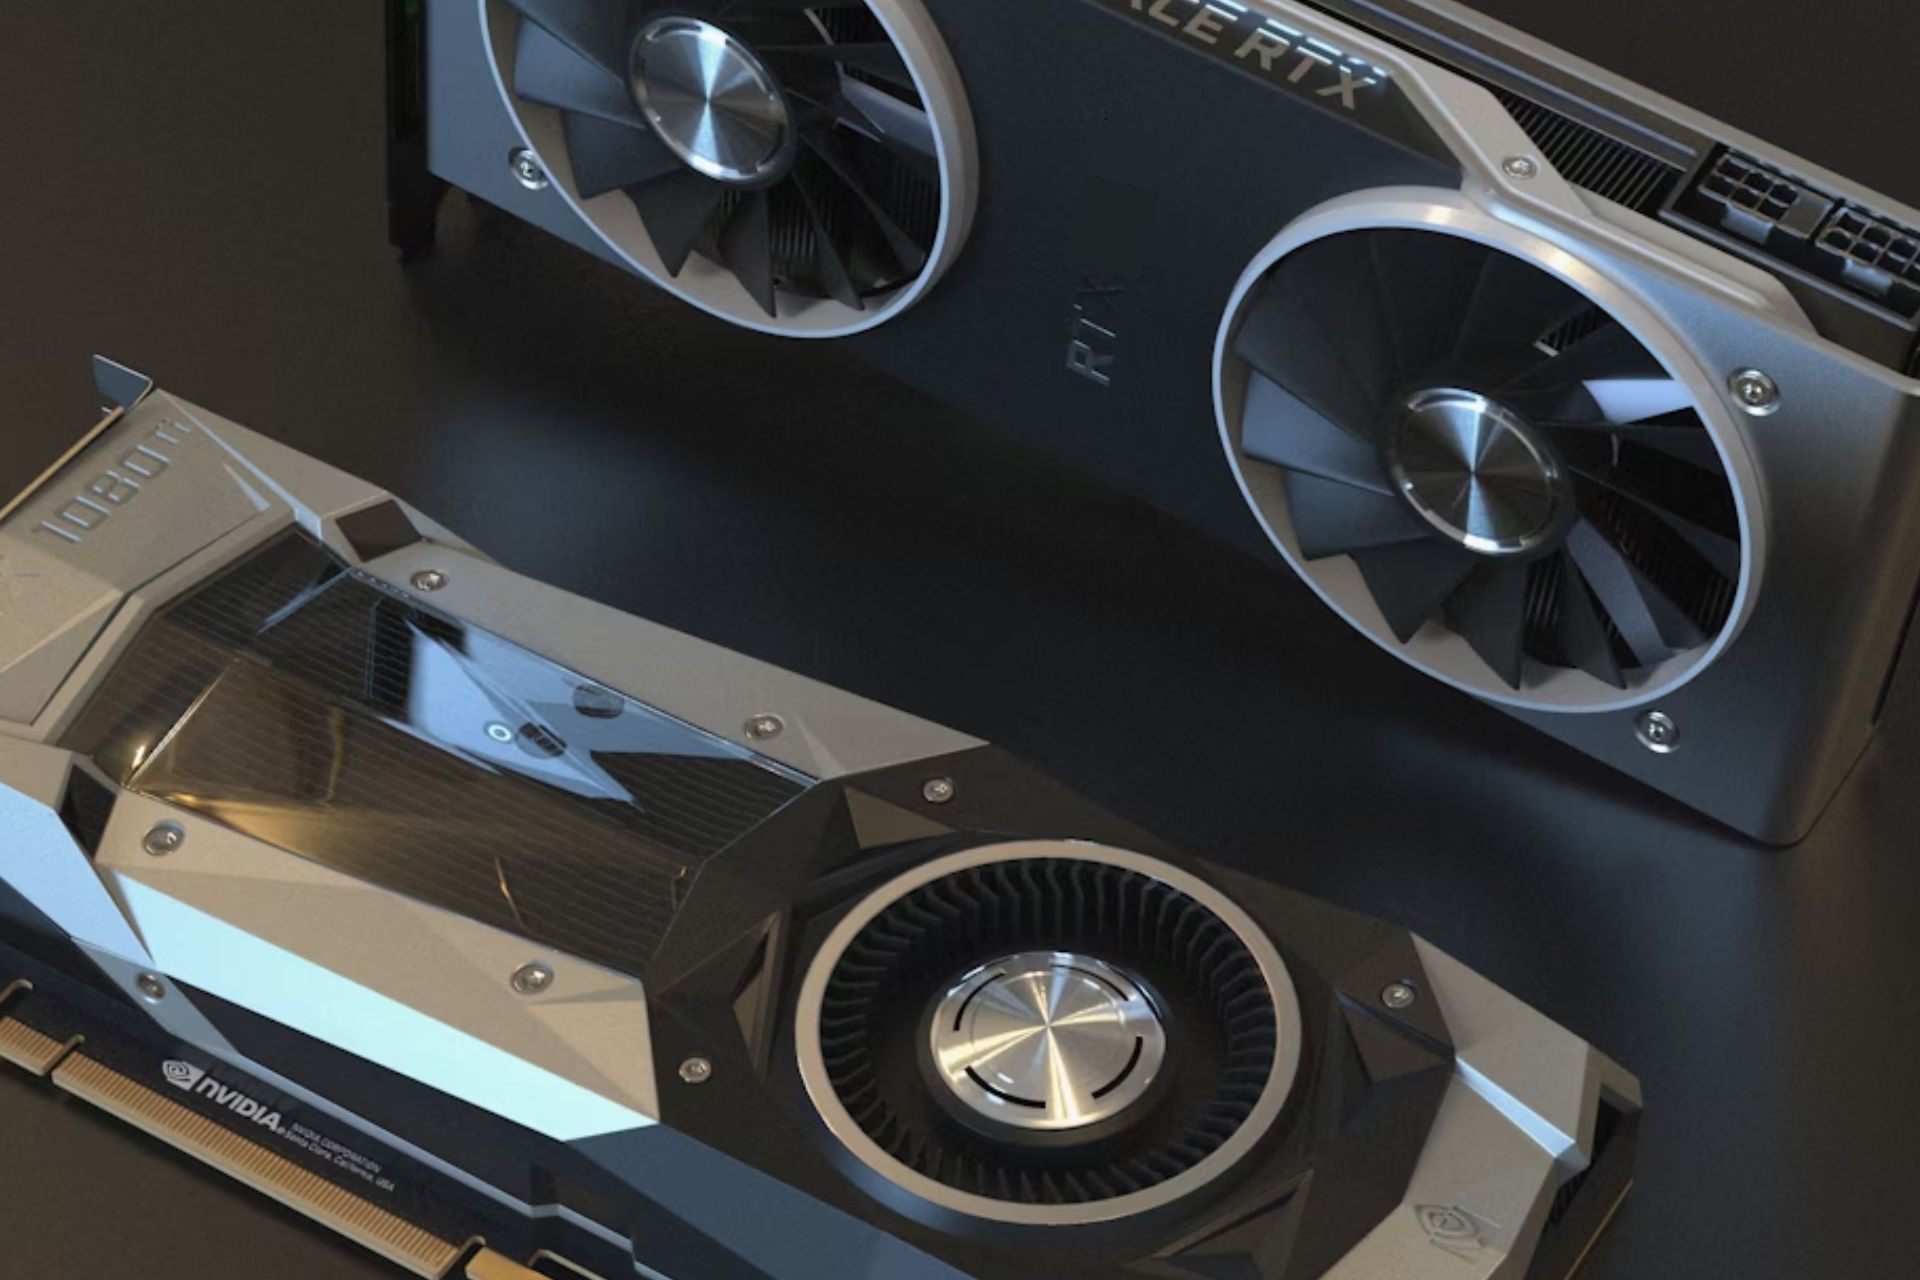 Nvidia RTX 5080 & 5090 announcement likely on the same day, leaker claims